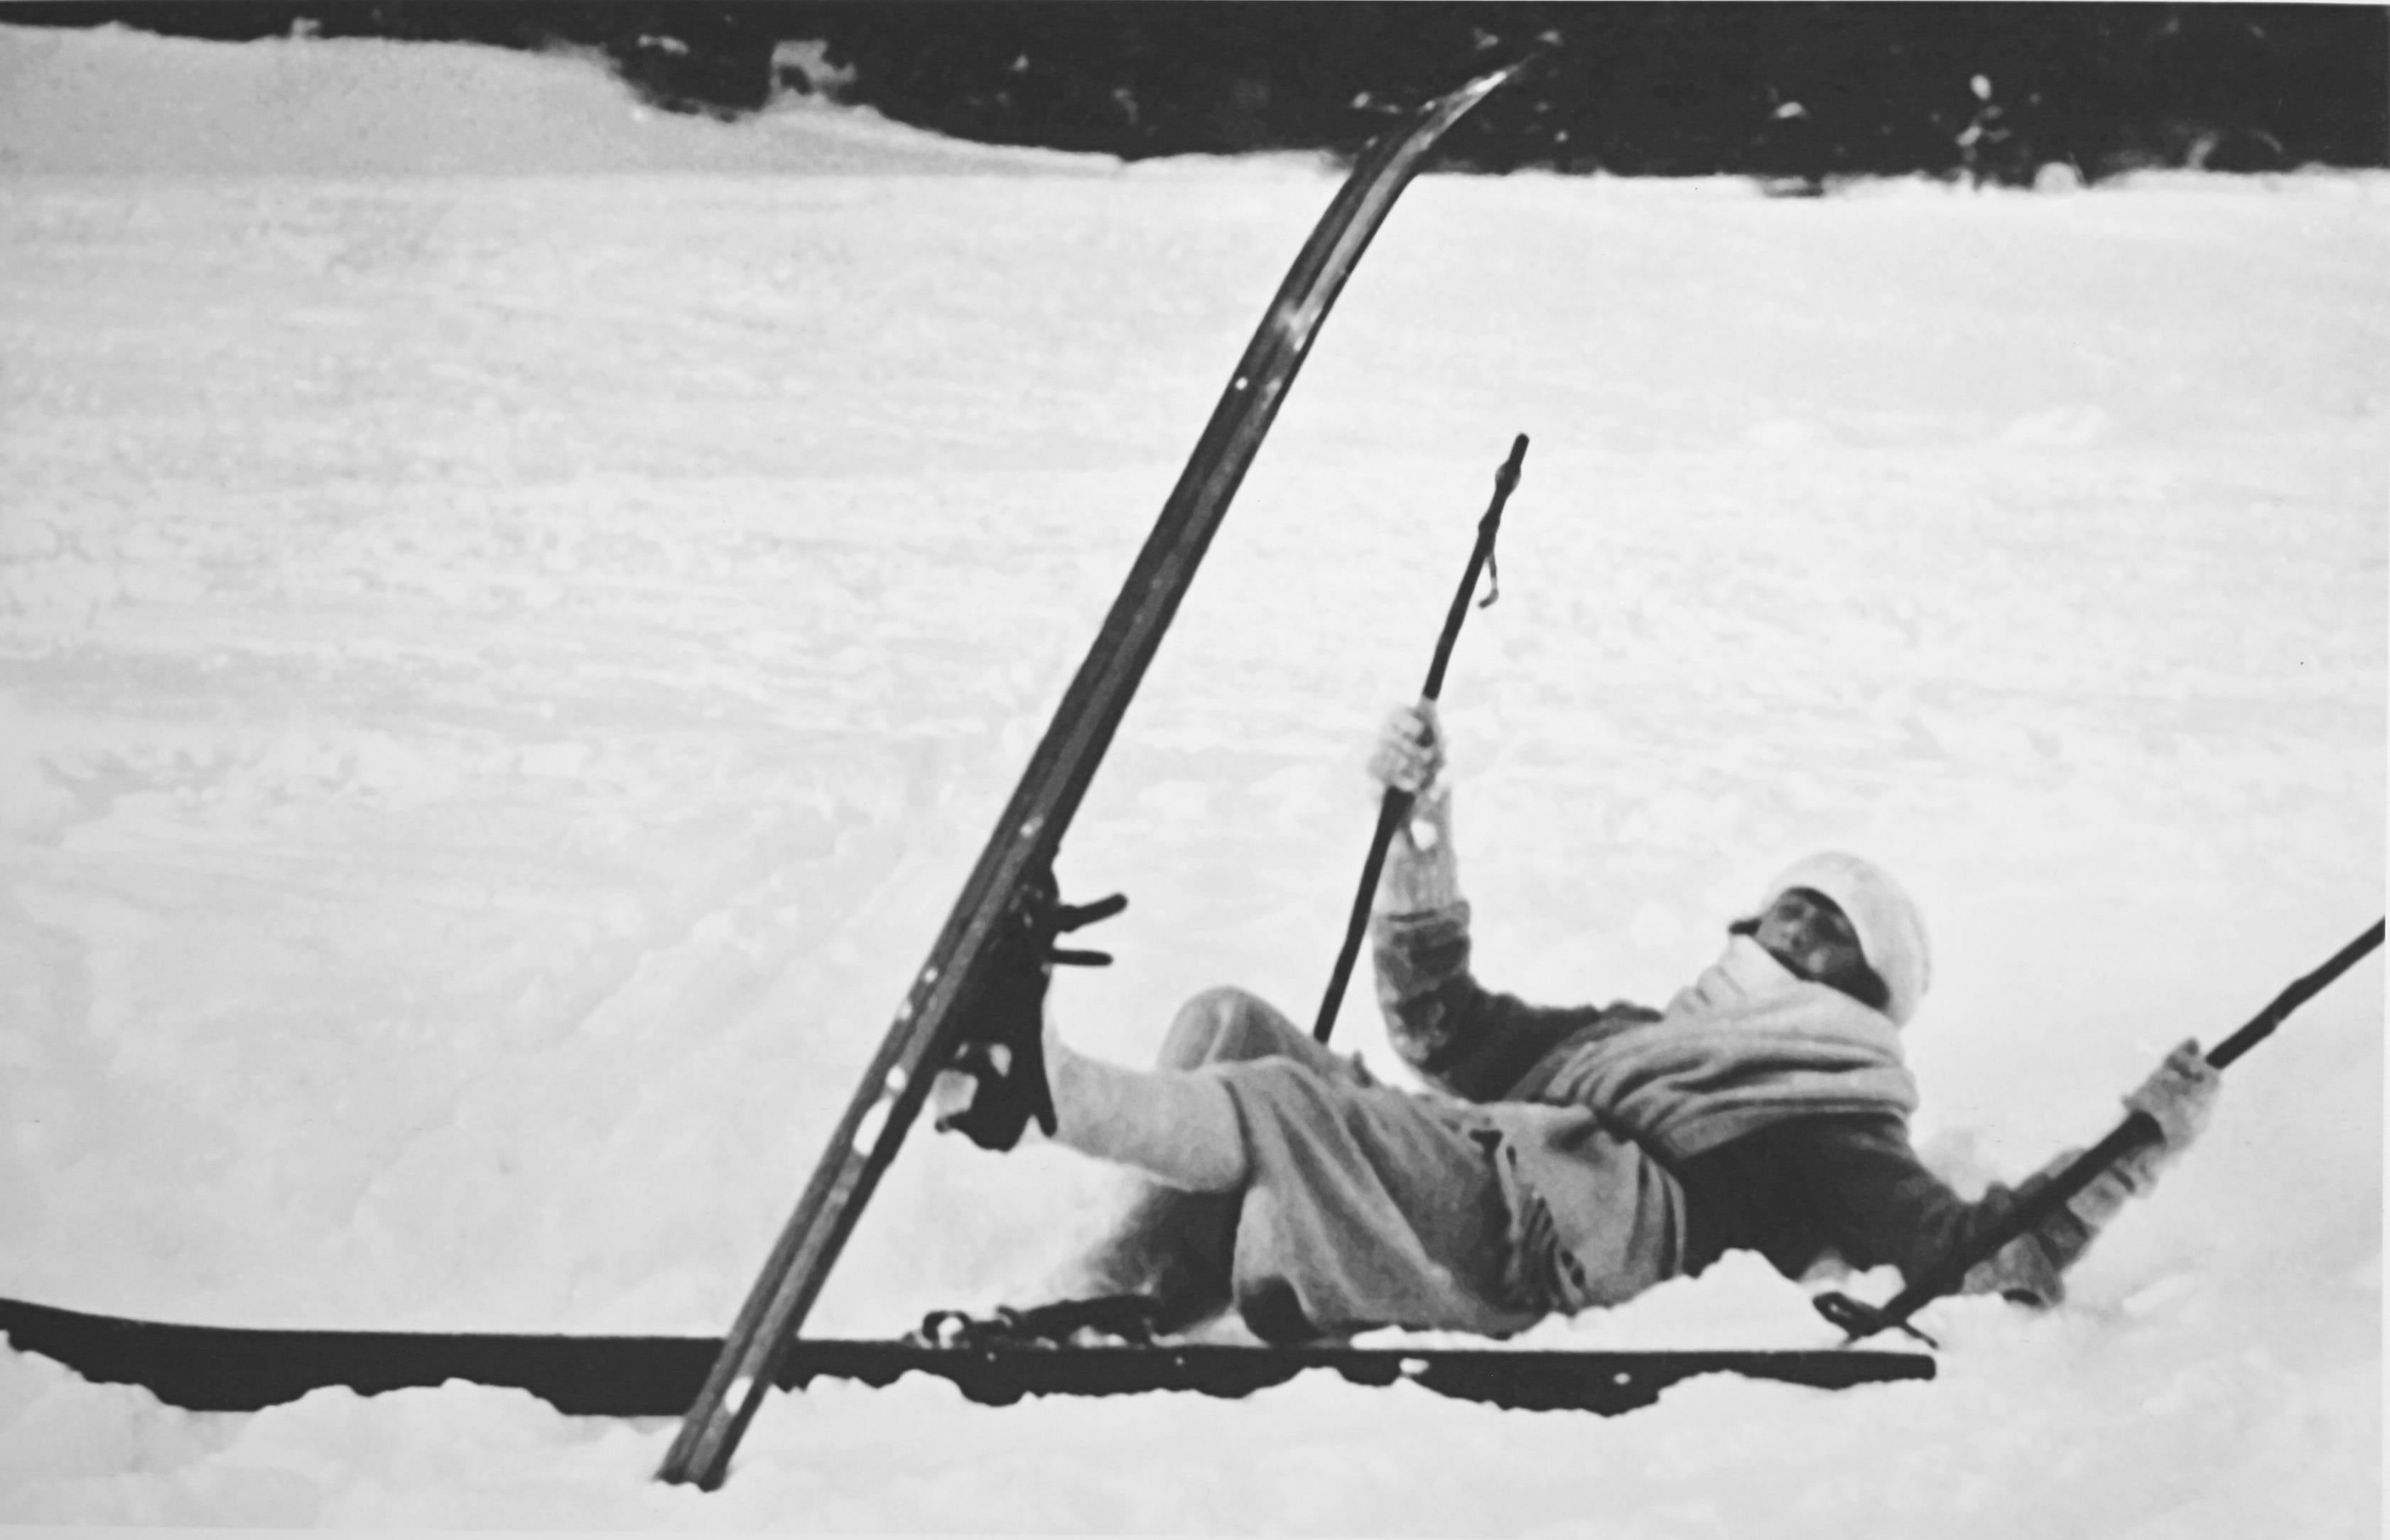 Vintage Ski Photography, antique Alpine Ski photograph.
'OPPS!', a new mounted black and white photographic image after an original 1930s skiing photograph. Black & white alpine photos are the perfect addition to any home or ski lodge. Prior to